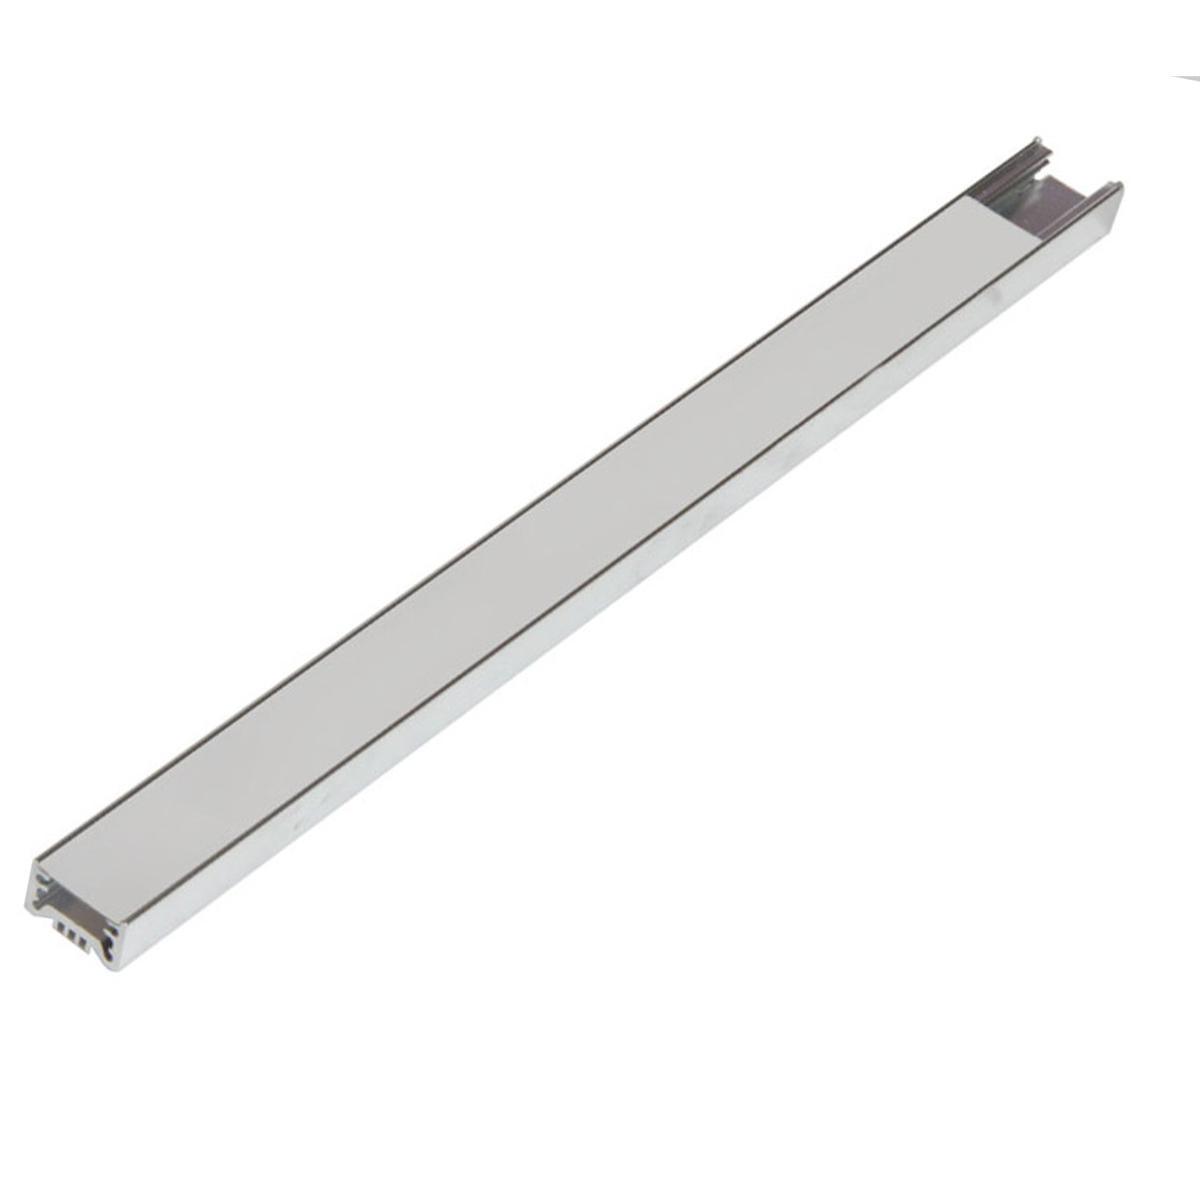 4ft Aluminum Linear Mounting Channels for LTR LED Strip and Tape Lights